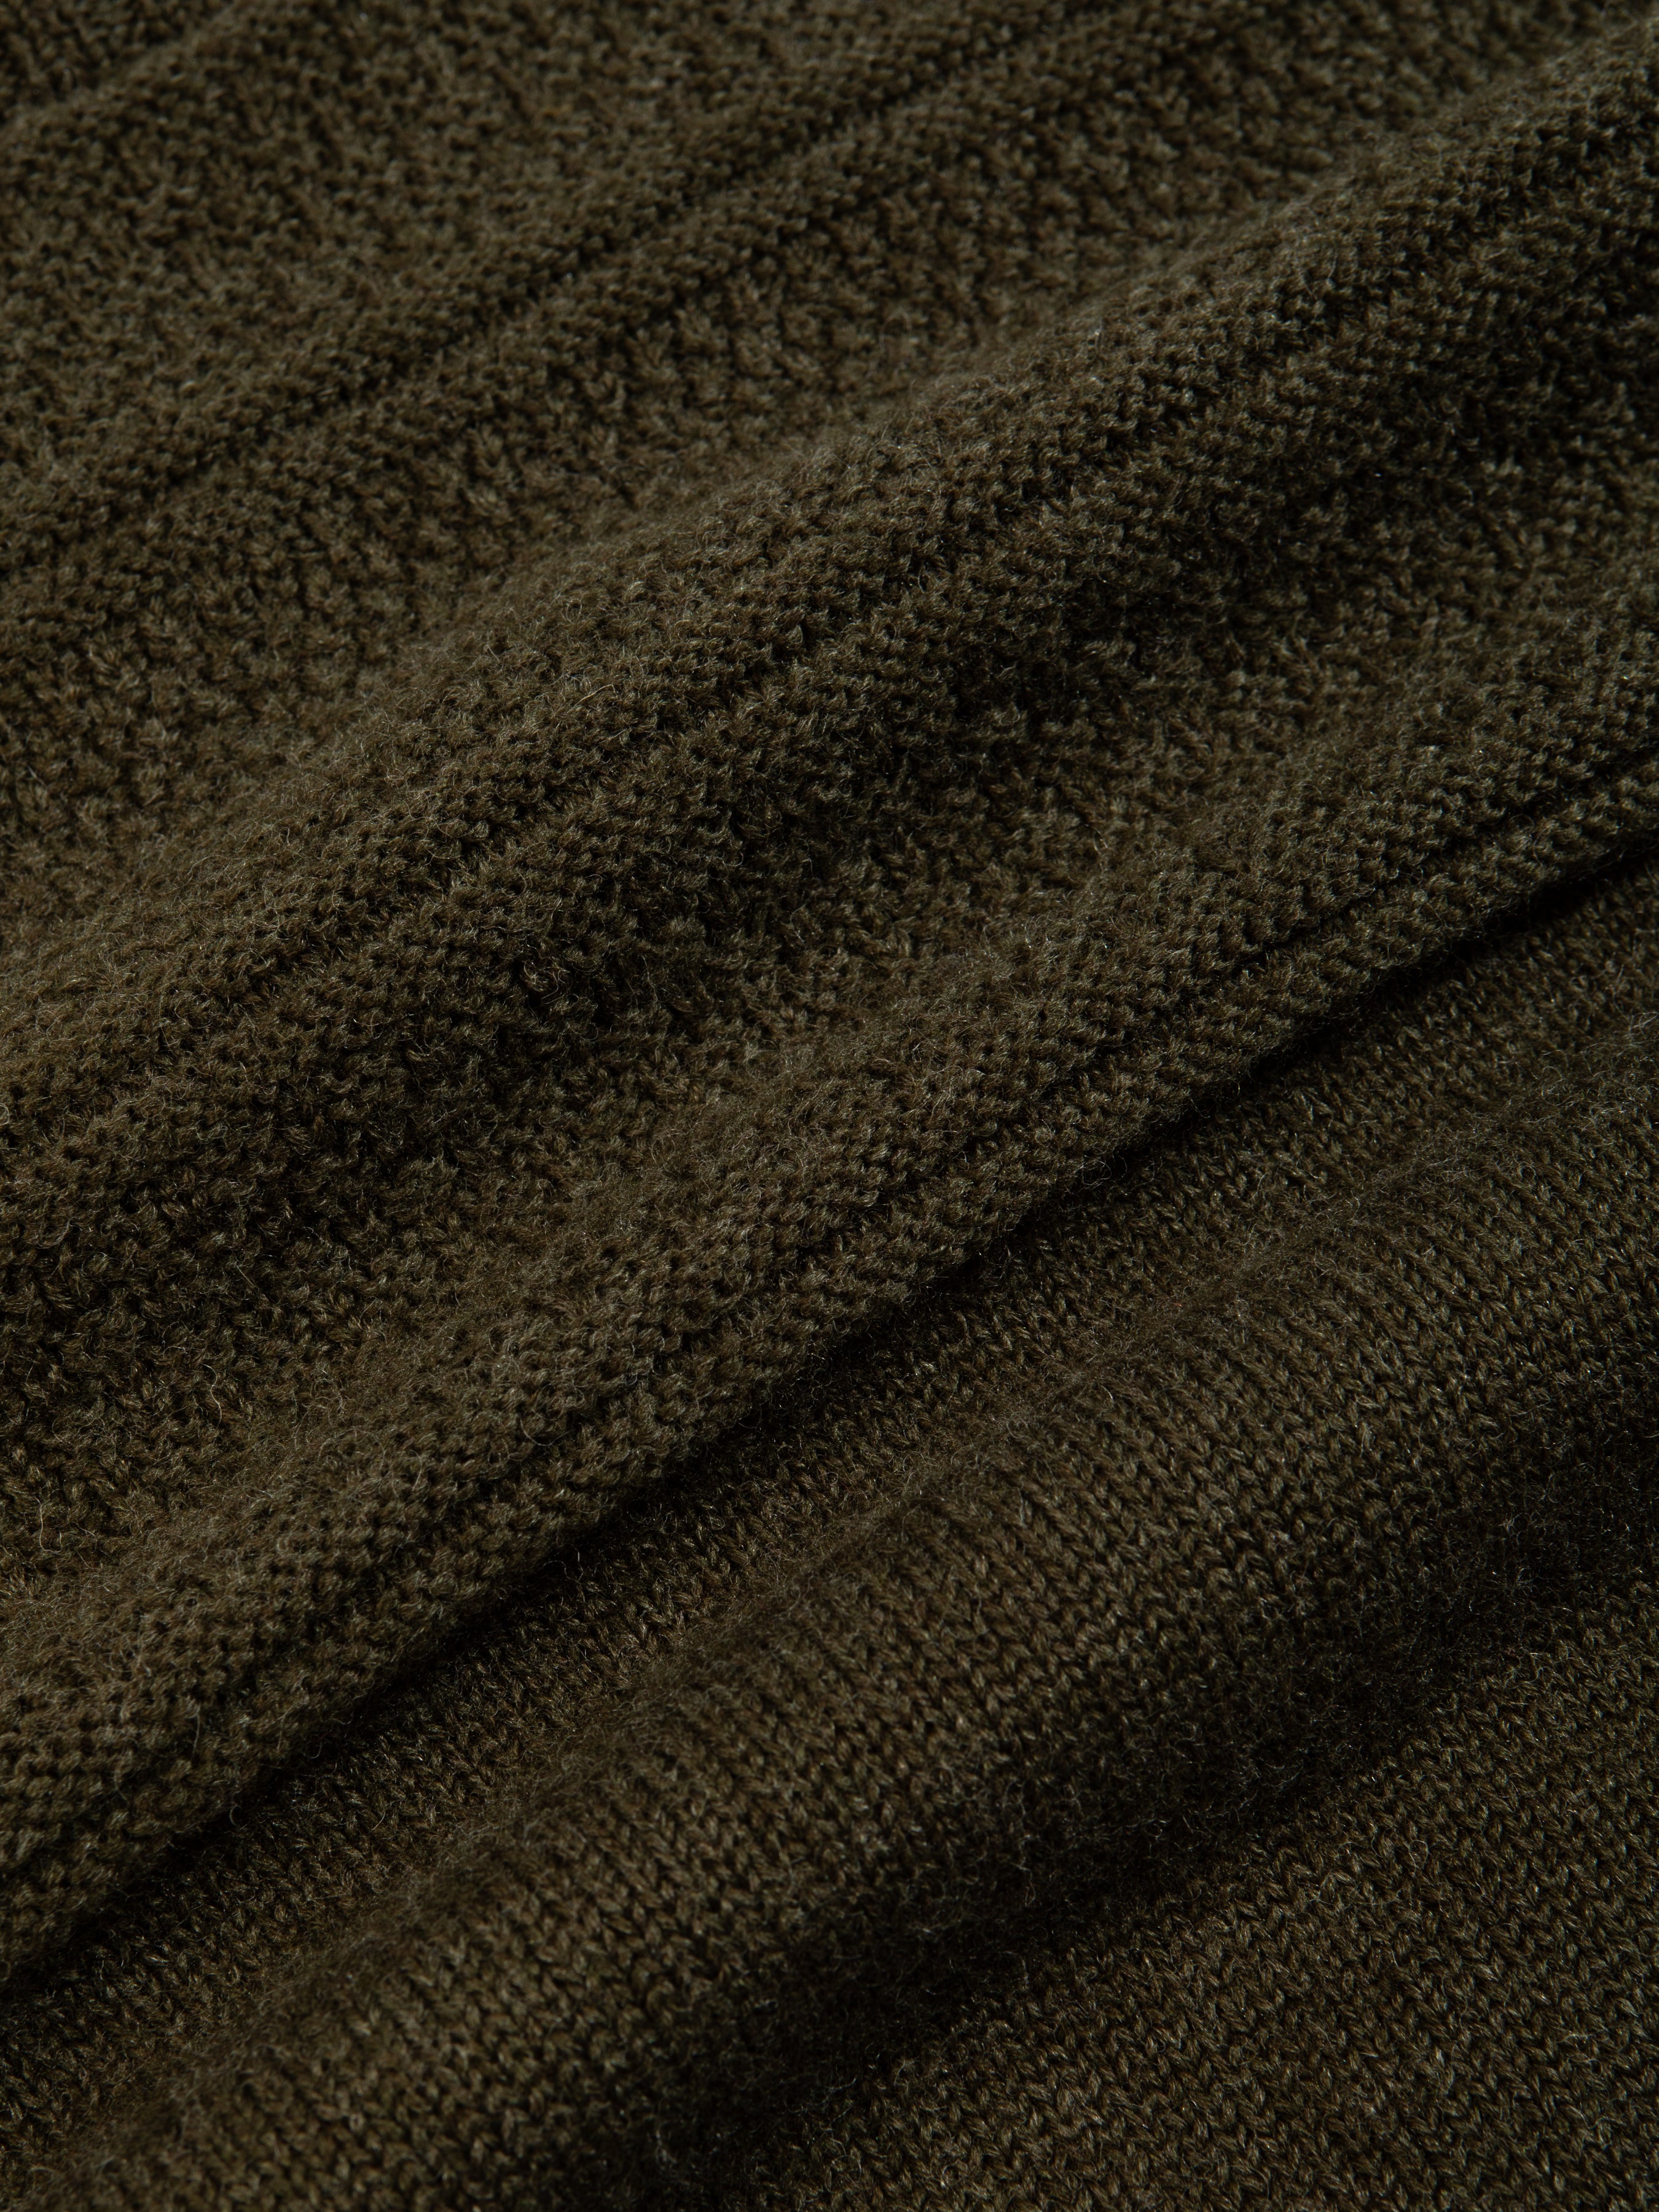 A knitted merino wool material, made in Scotland in olive green.